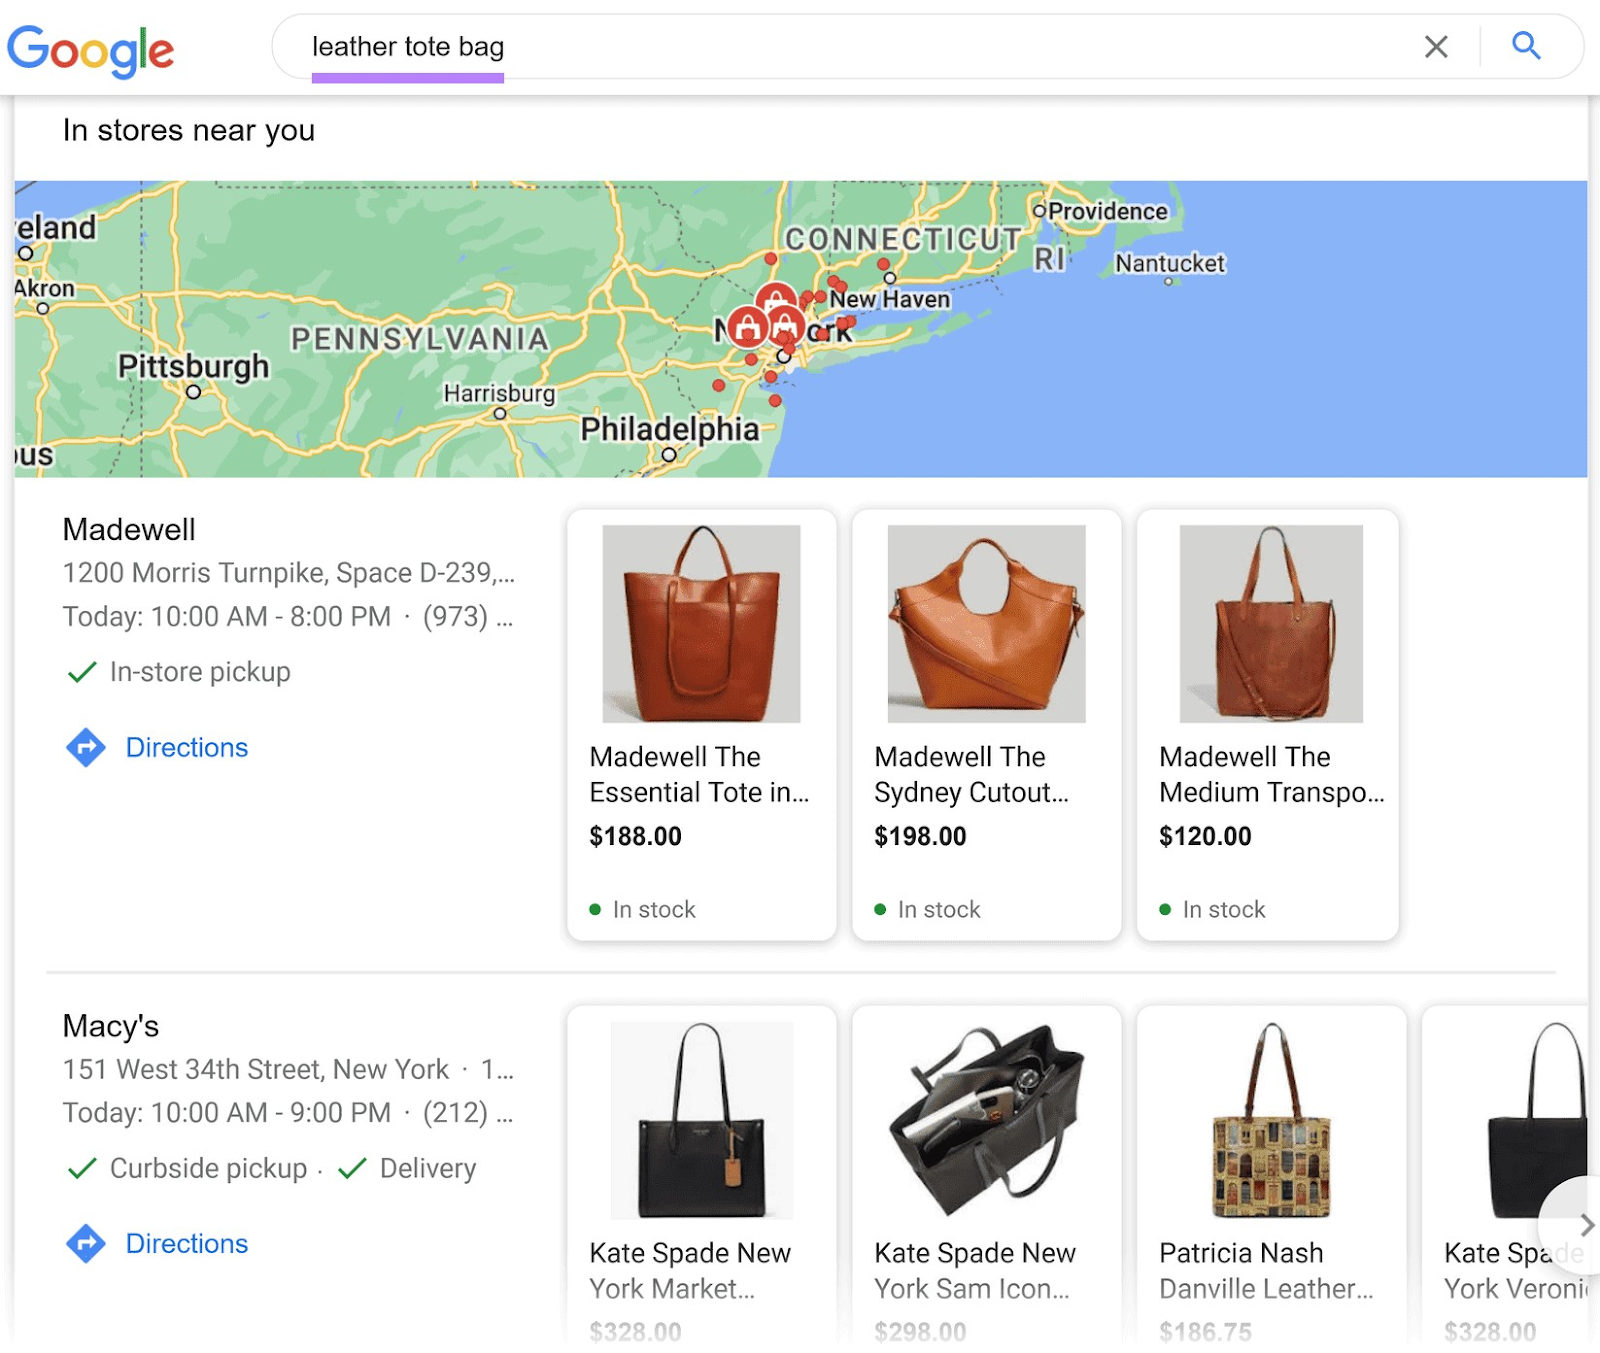 Google Shopping results for "leather tote bag"